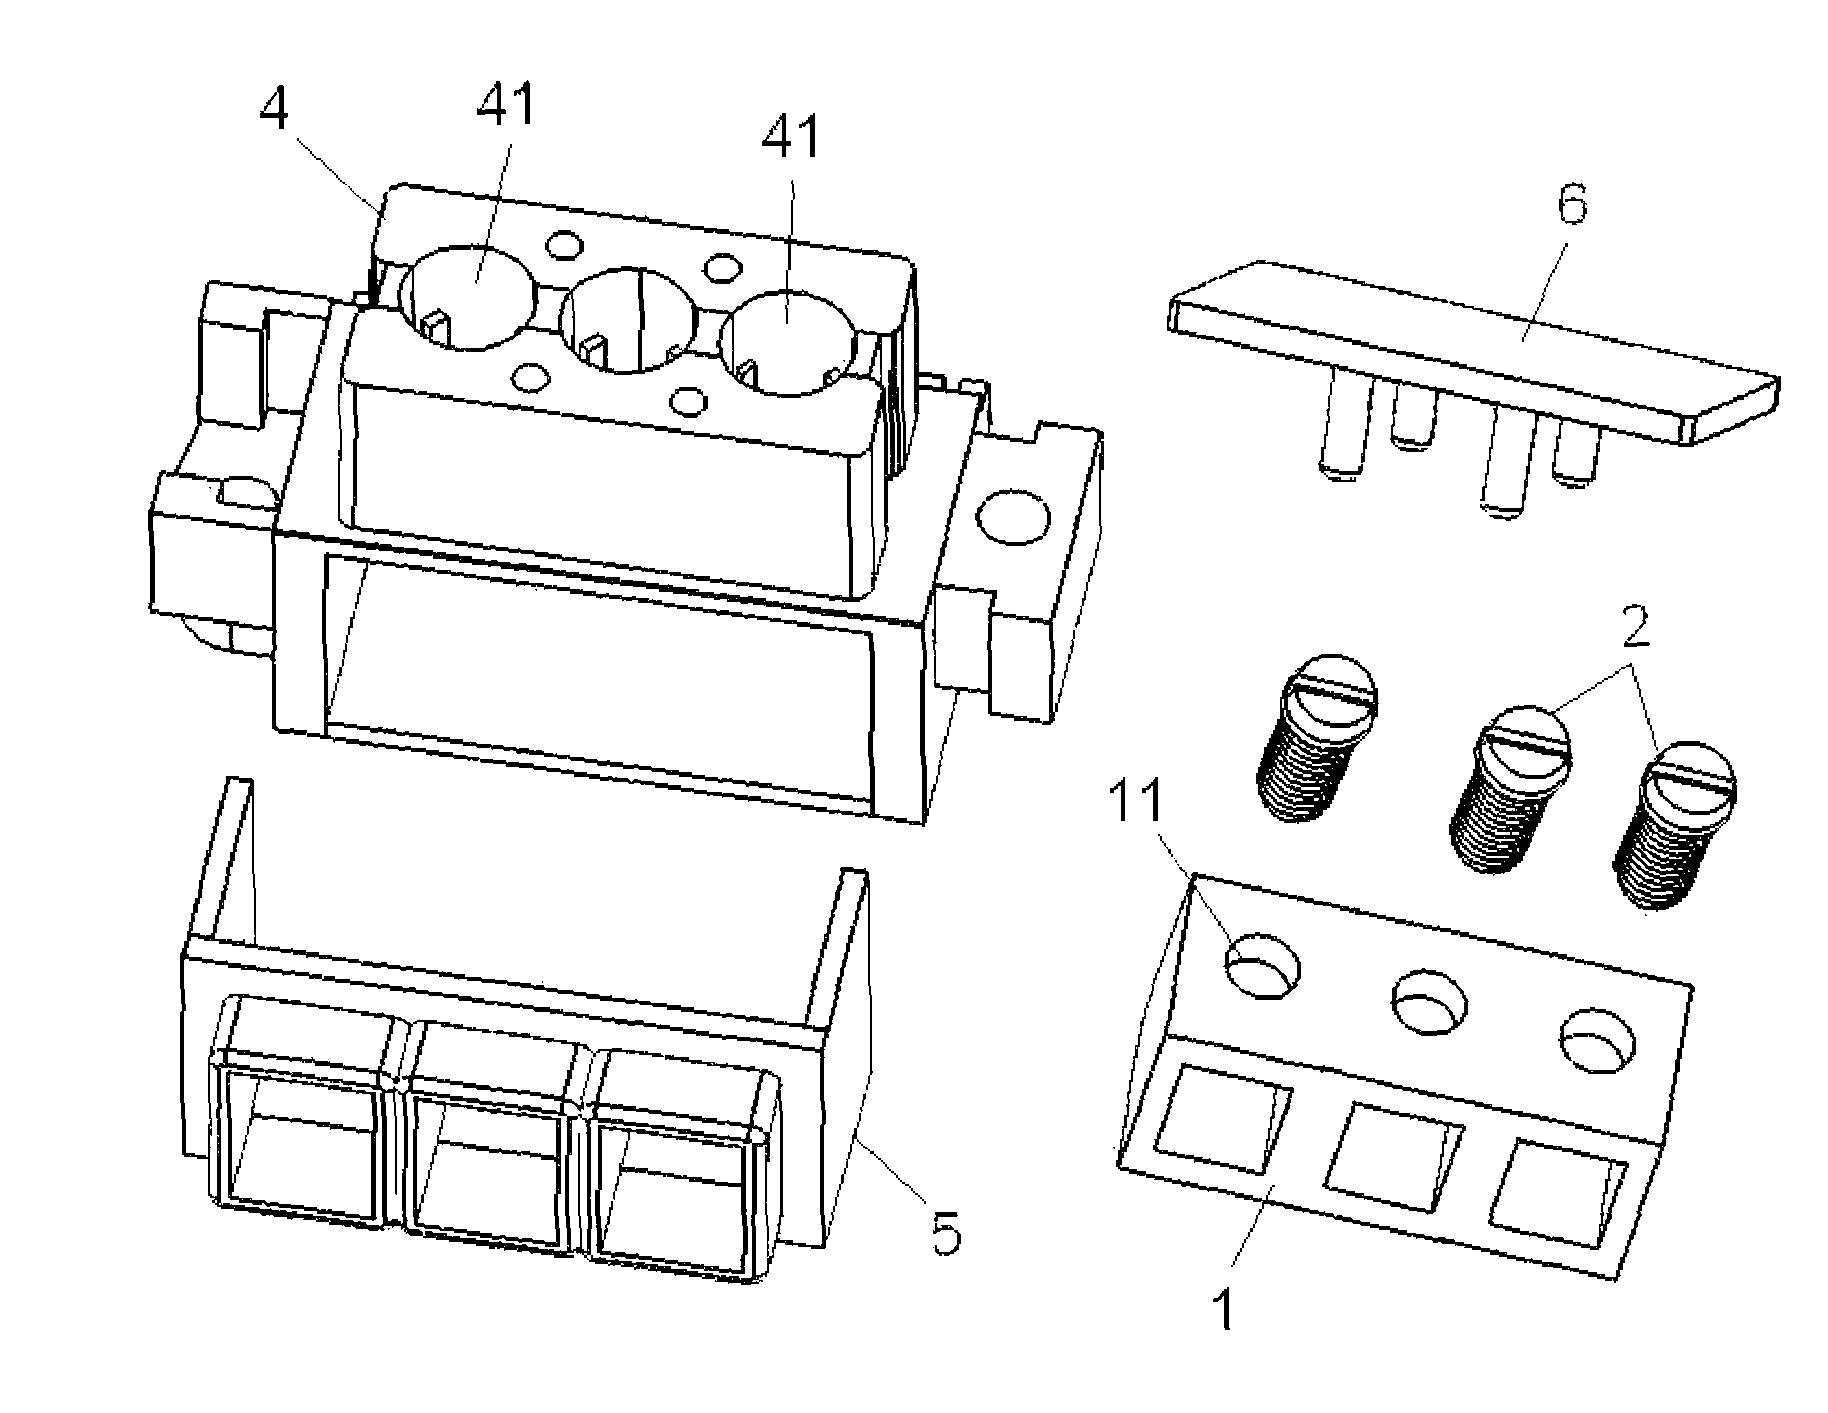 Modular connector for electric connections